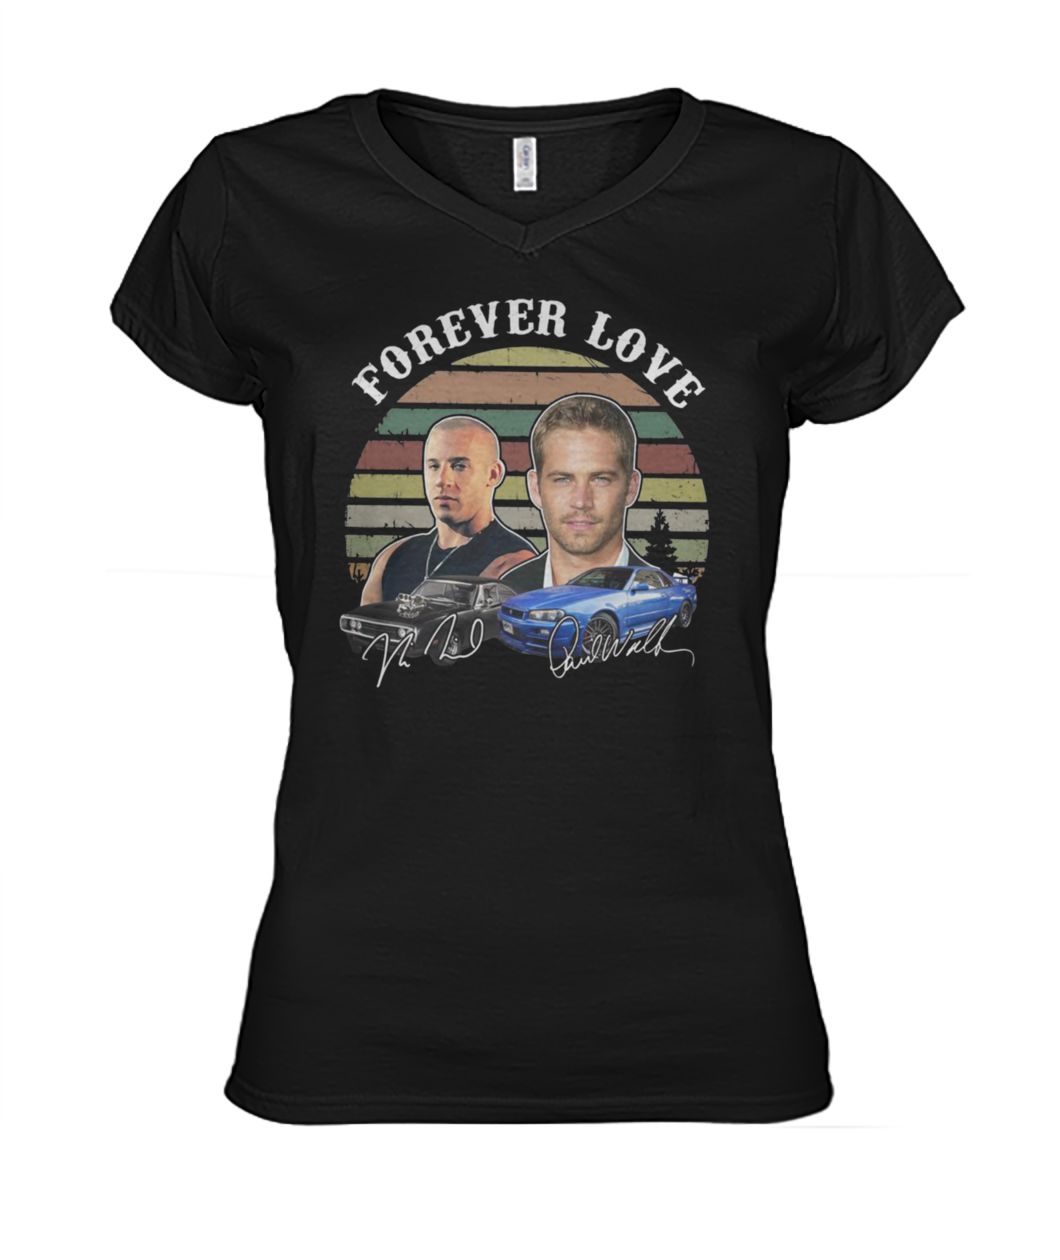 Forever love fast and furious vintage signatures women's v-neck